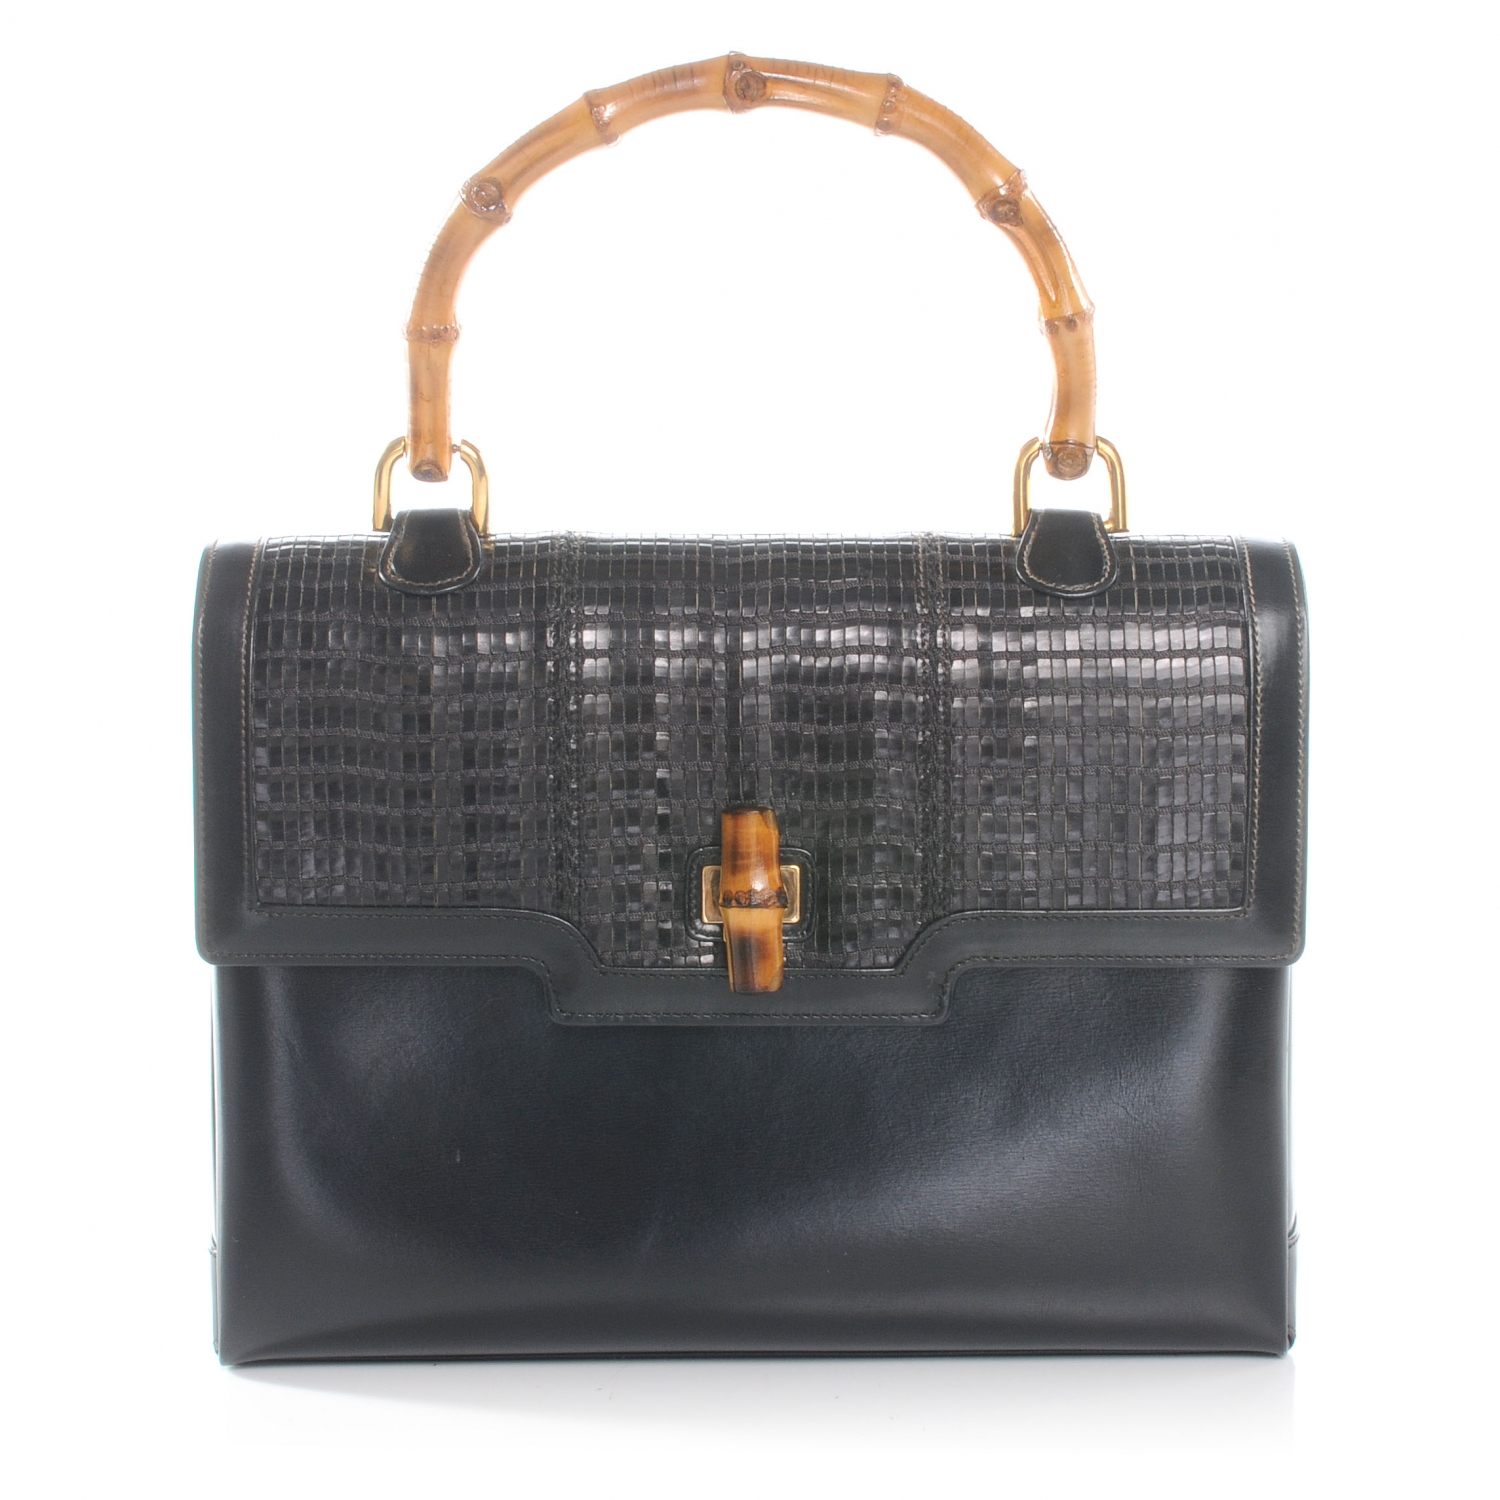 GUCCI Woven Leather Bamboo Top Handle Bag Black 44868